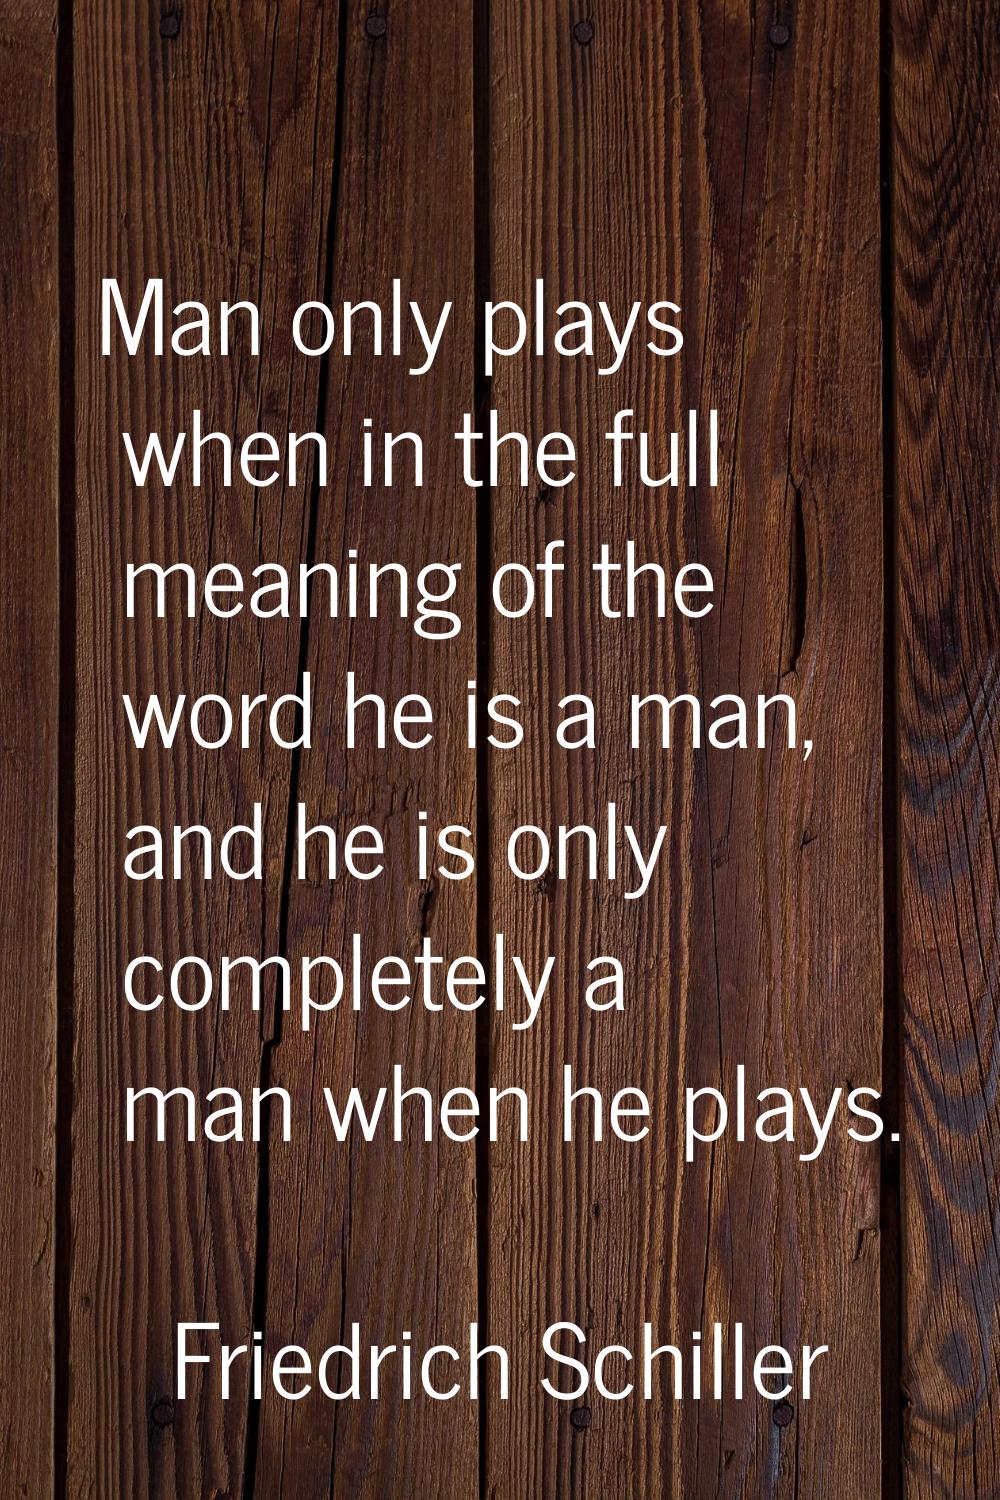 Man only plays when in the full meaning of the word he is a man, and he is only completely a man wh